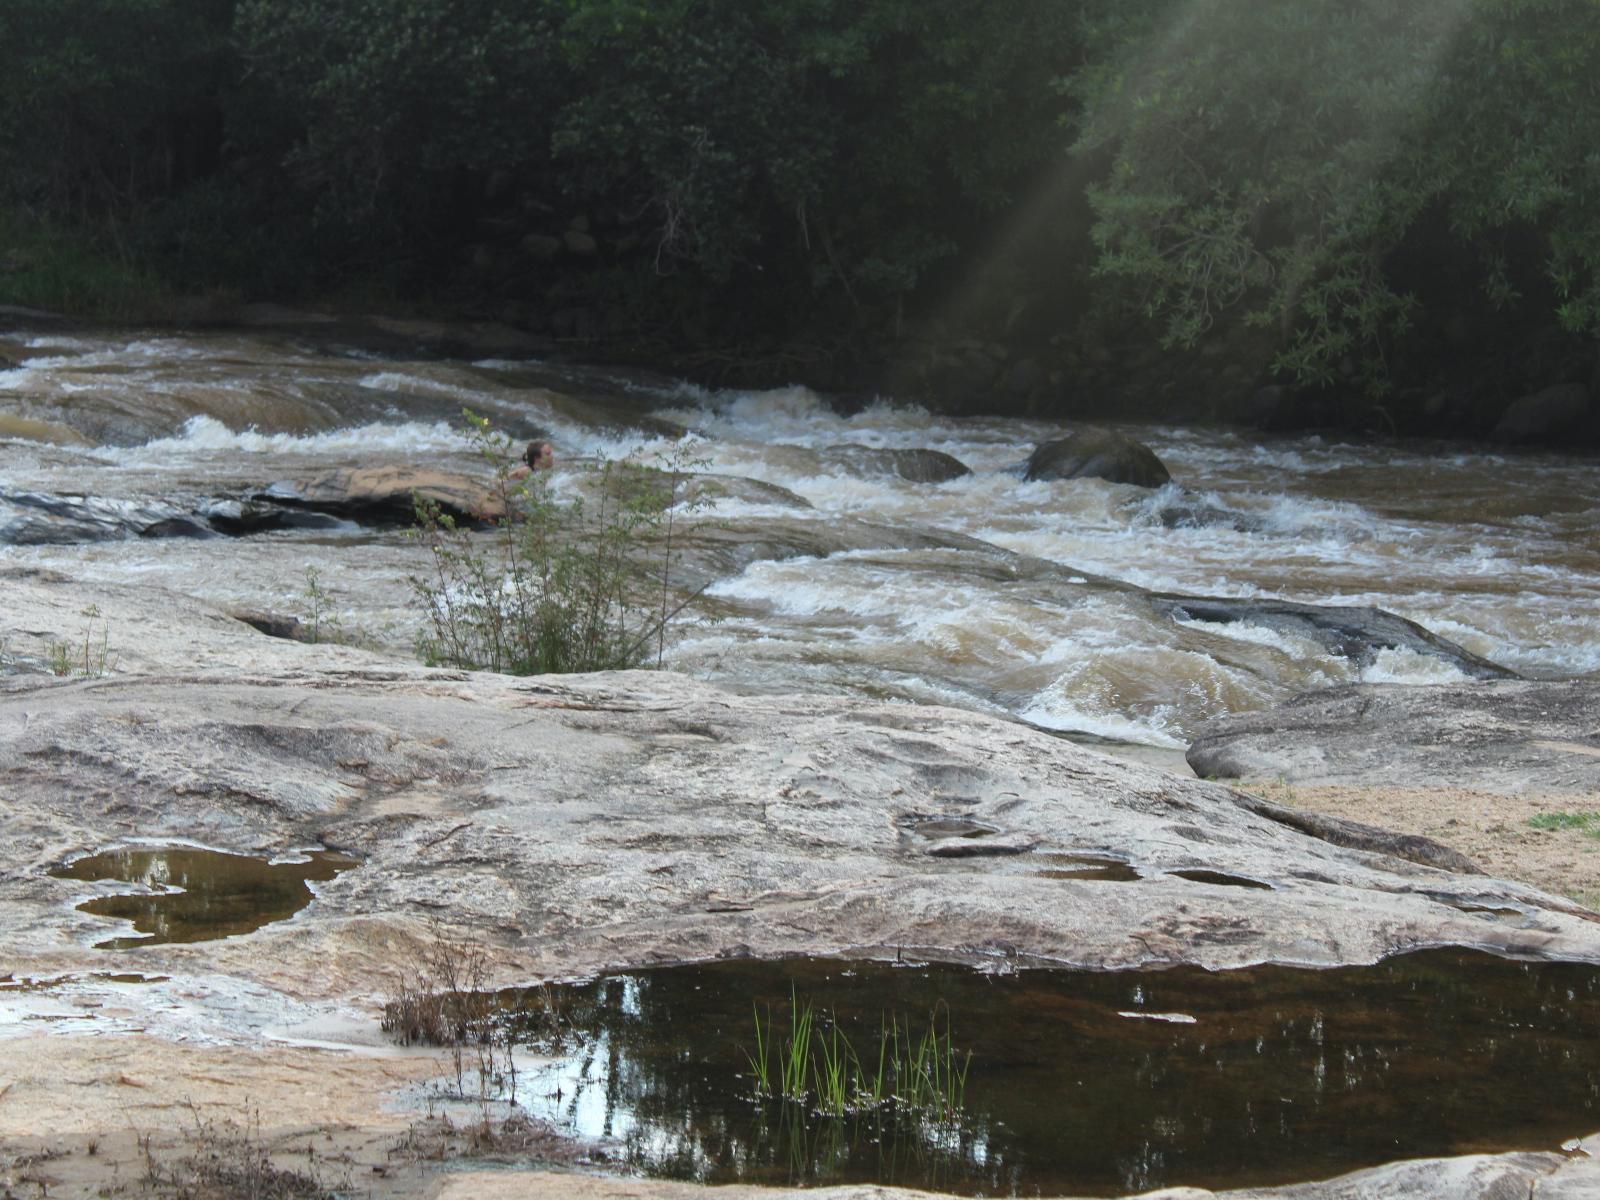 Lions Rock Rapids Hazyview Mpumalanga South Africa Unsaturated, River, Nature, Waters, Tree, Plant, Wood, Waterfall